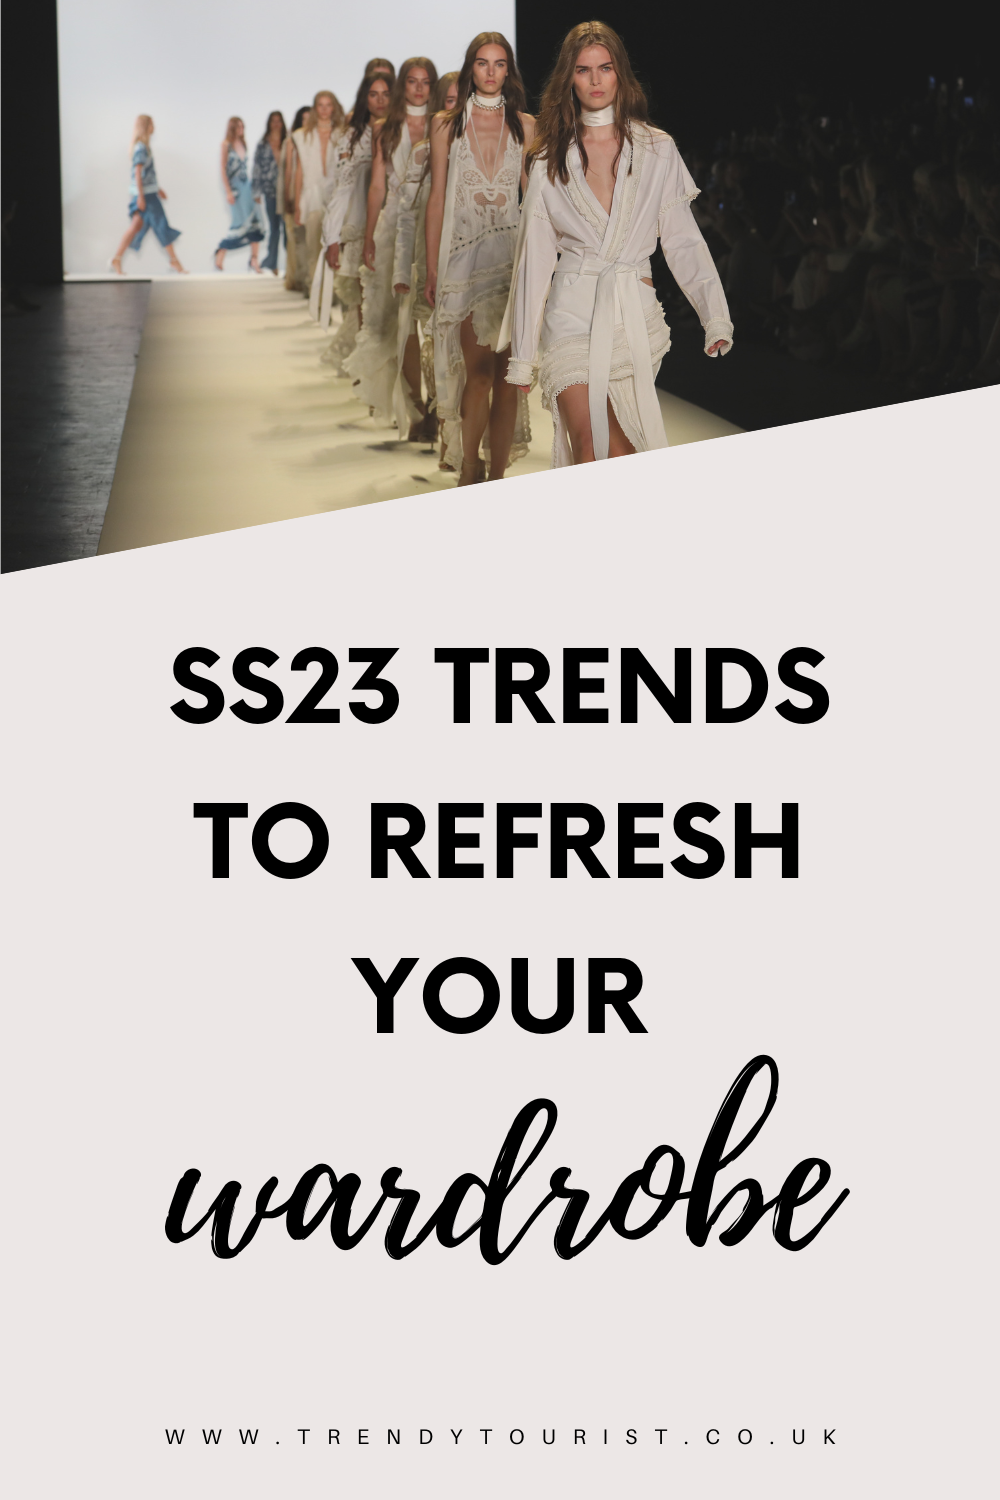 SS23 Trends to Refresh Your Wardrobe